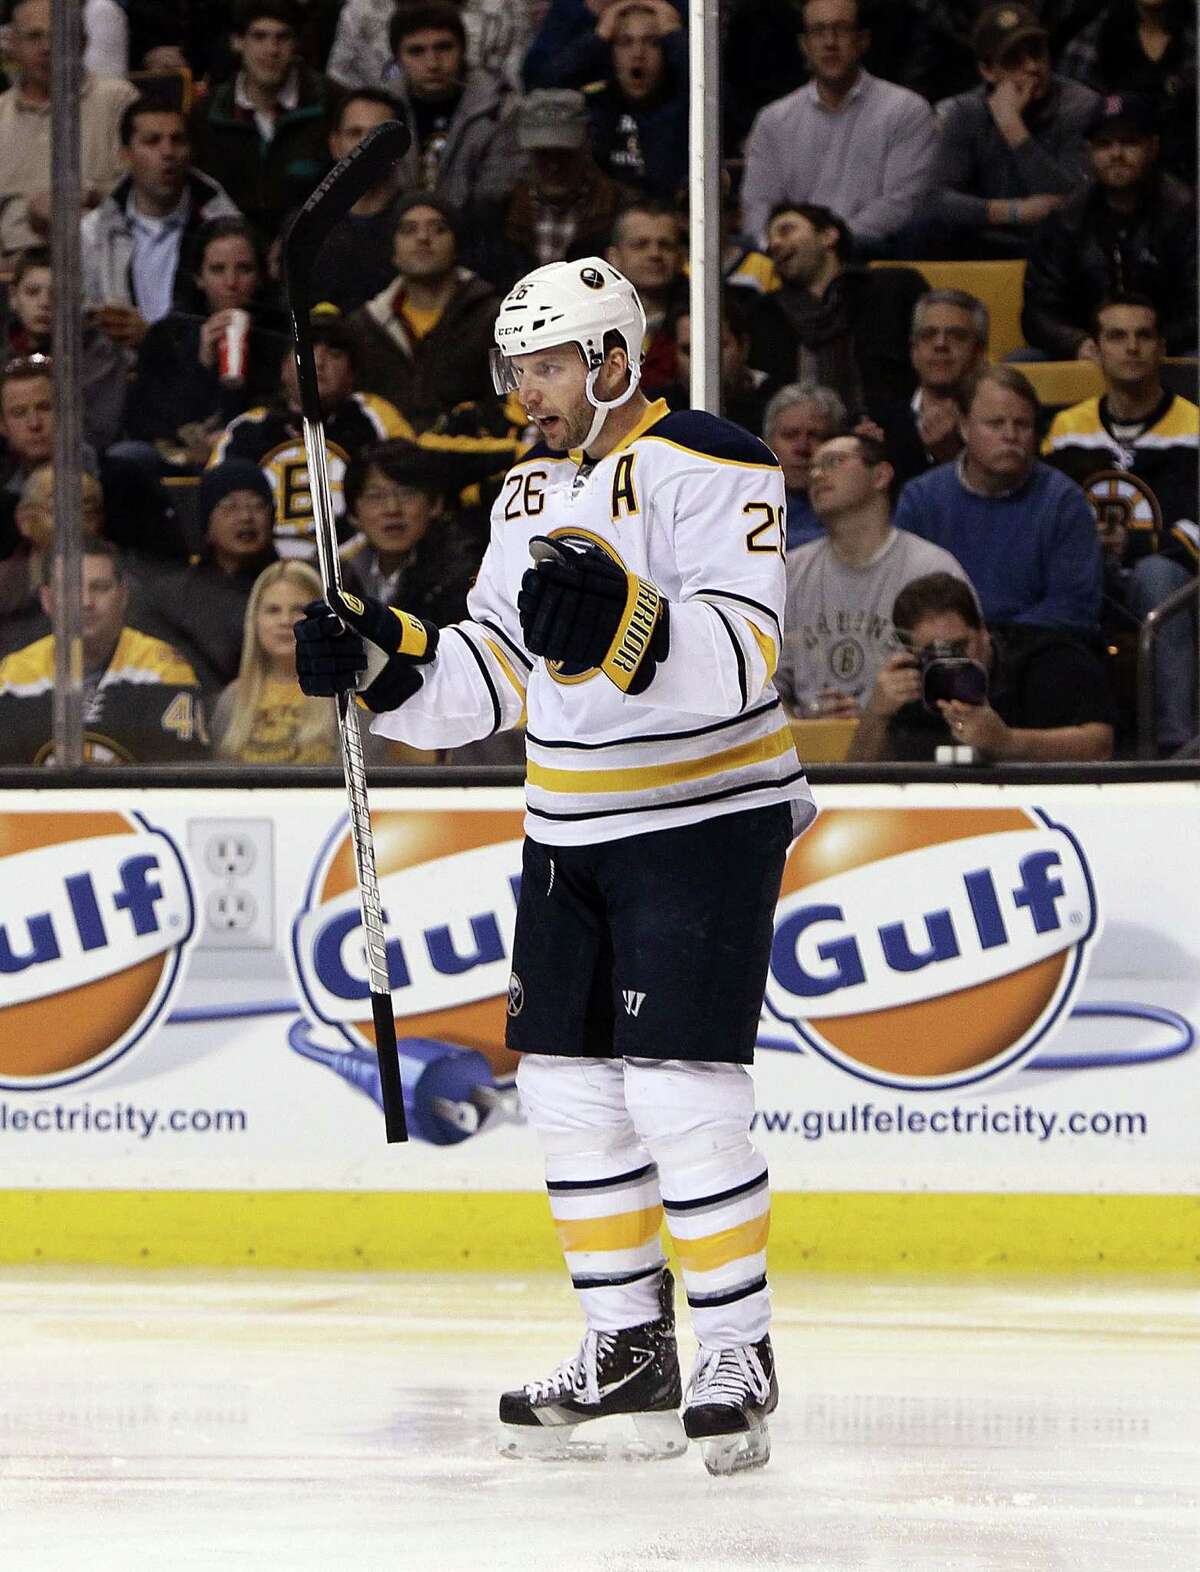 BOSTON, MA - JANUARY 31: Thomas Vanek #26 of the Buffalo Sabres celebrates a second-period goal against the Boston Bruins during a game at the TD Garden on January 31, 2013 in Boston, Massachusetts. (Photo by Alex Trautwig/Getty Images)